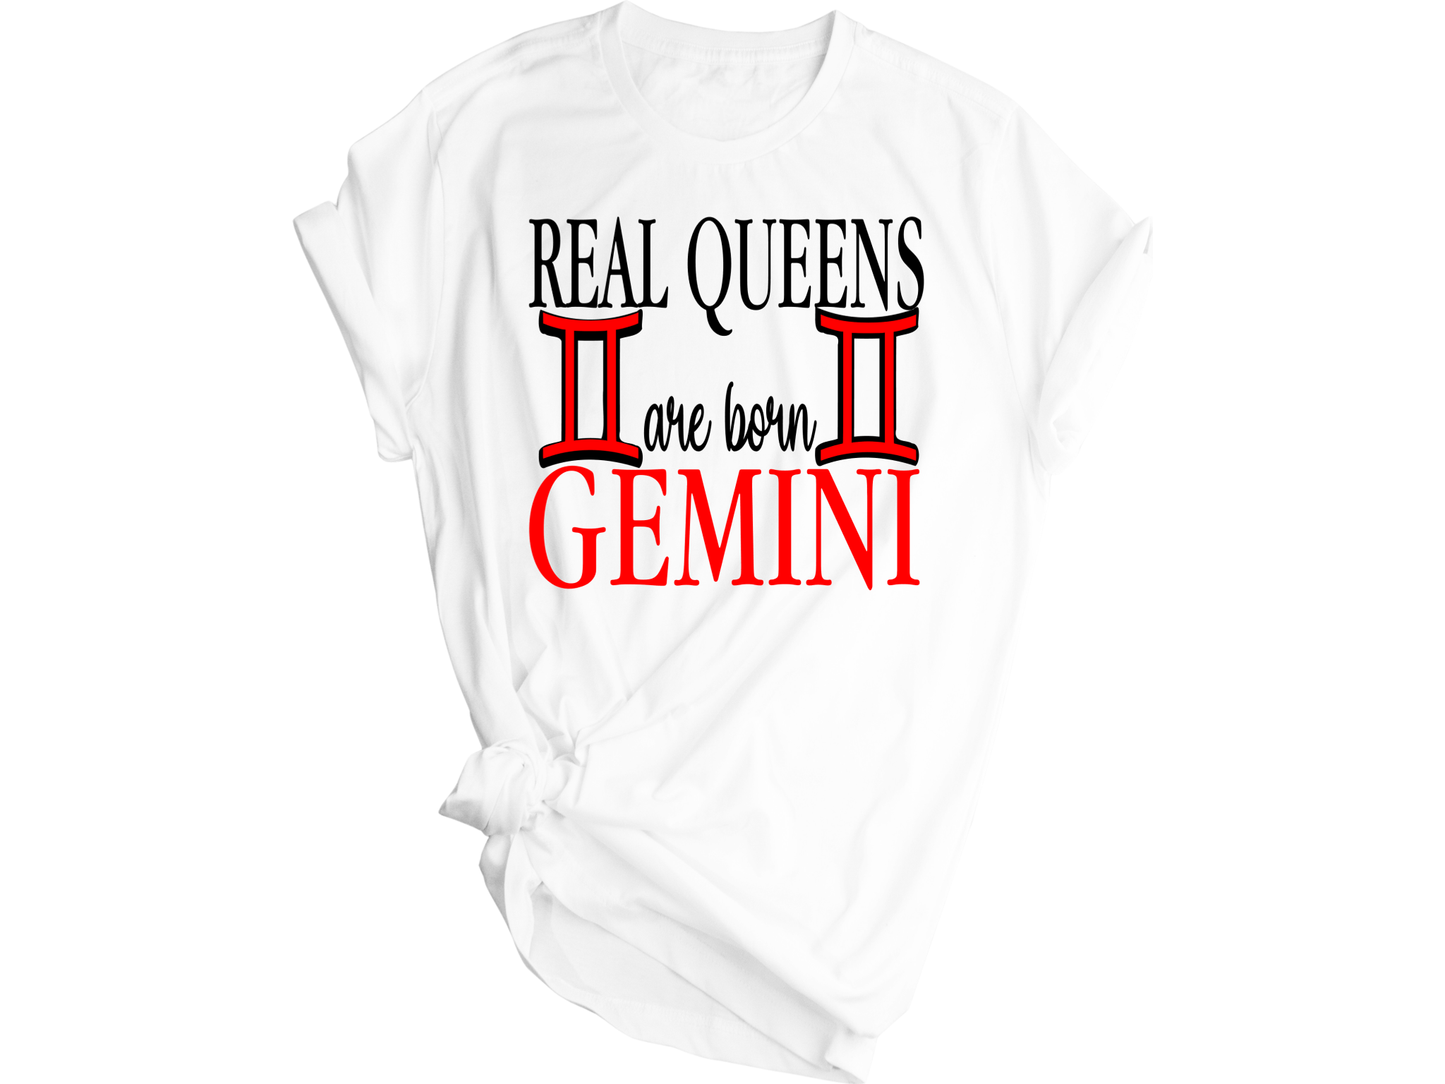 Real Queens are born in Zodiac Shirts, Birthday Shirt, Birthday Shirt For Women